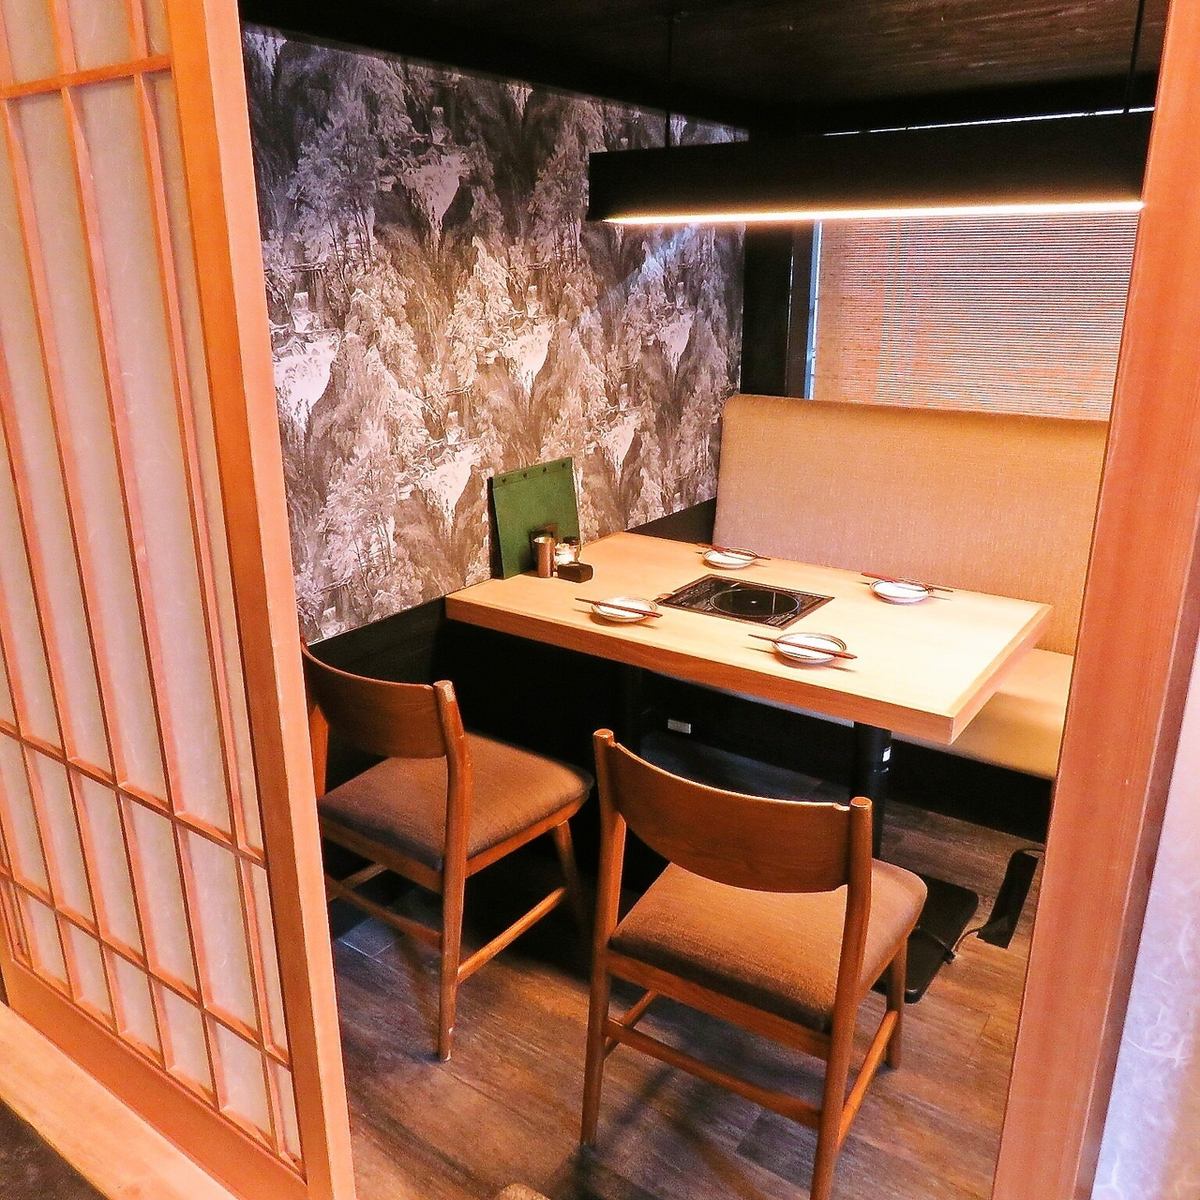 You can dine in a completely private room with a door for peace of mind. We can accommodate various numbers of people.